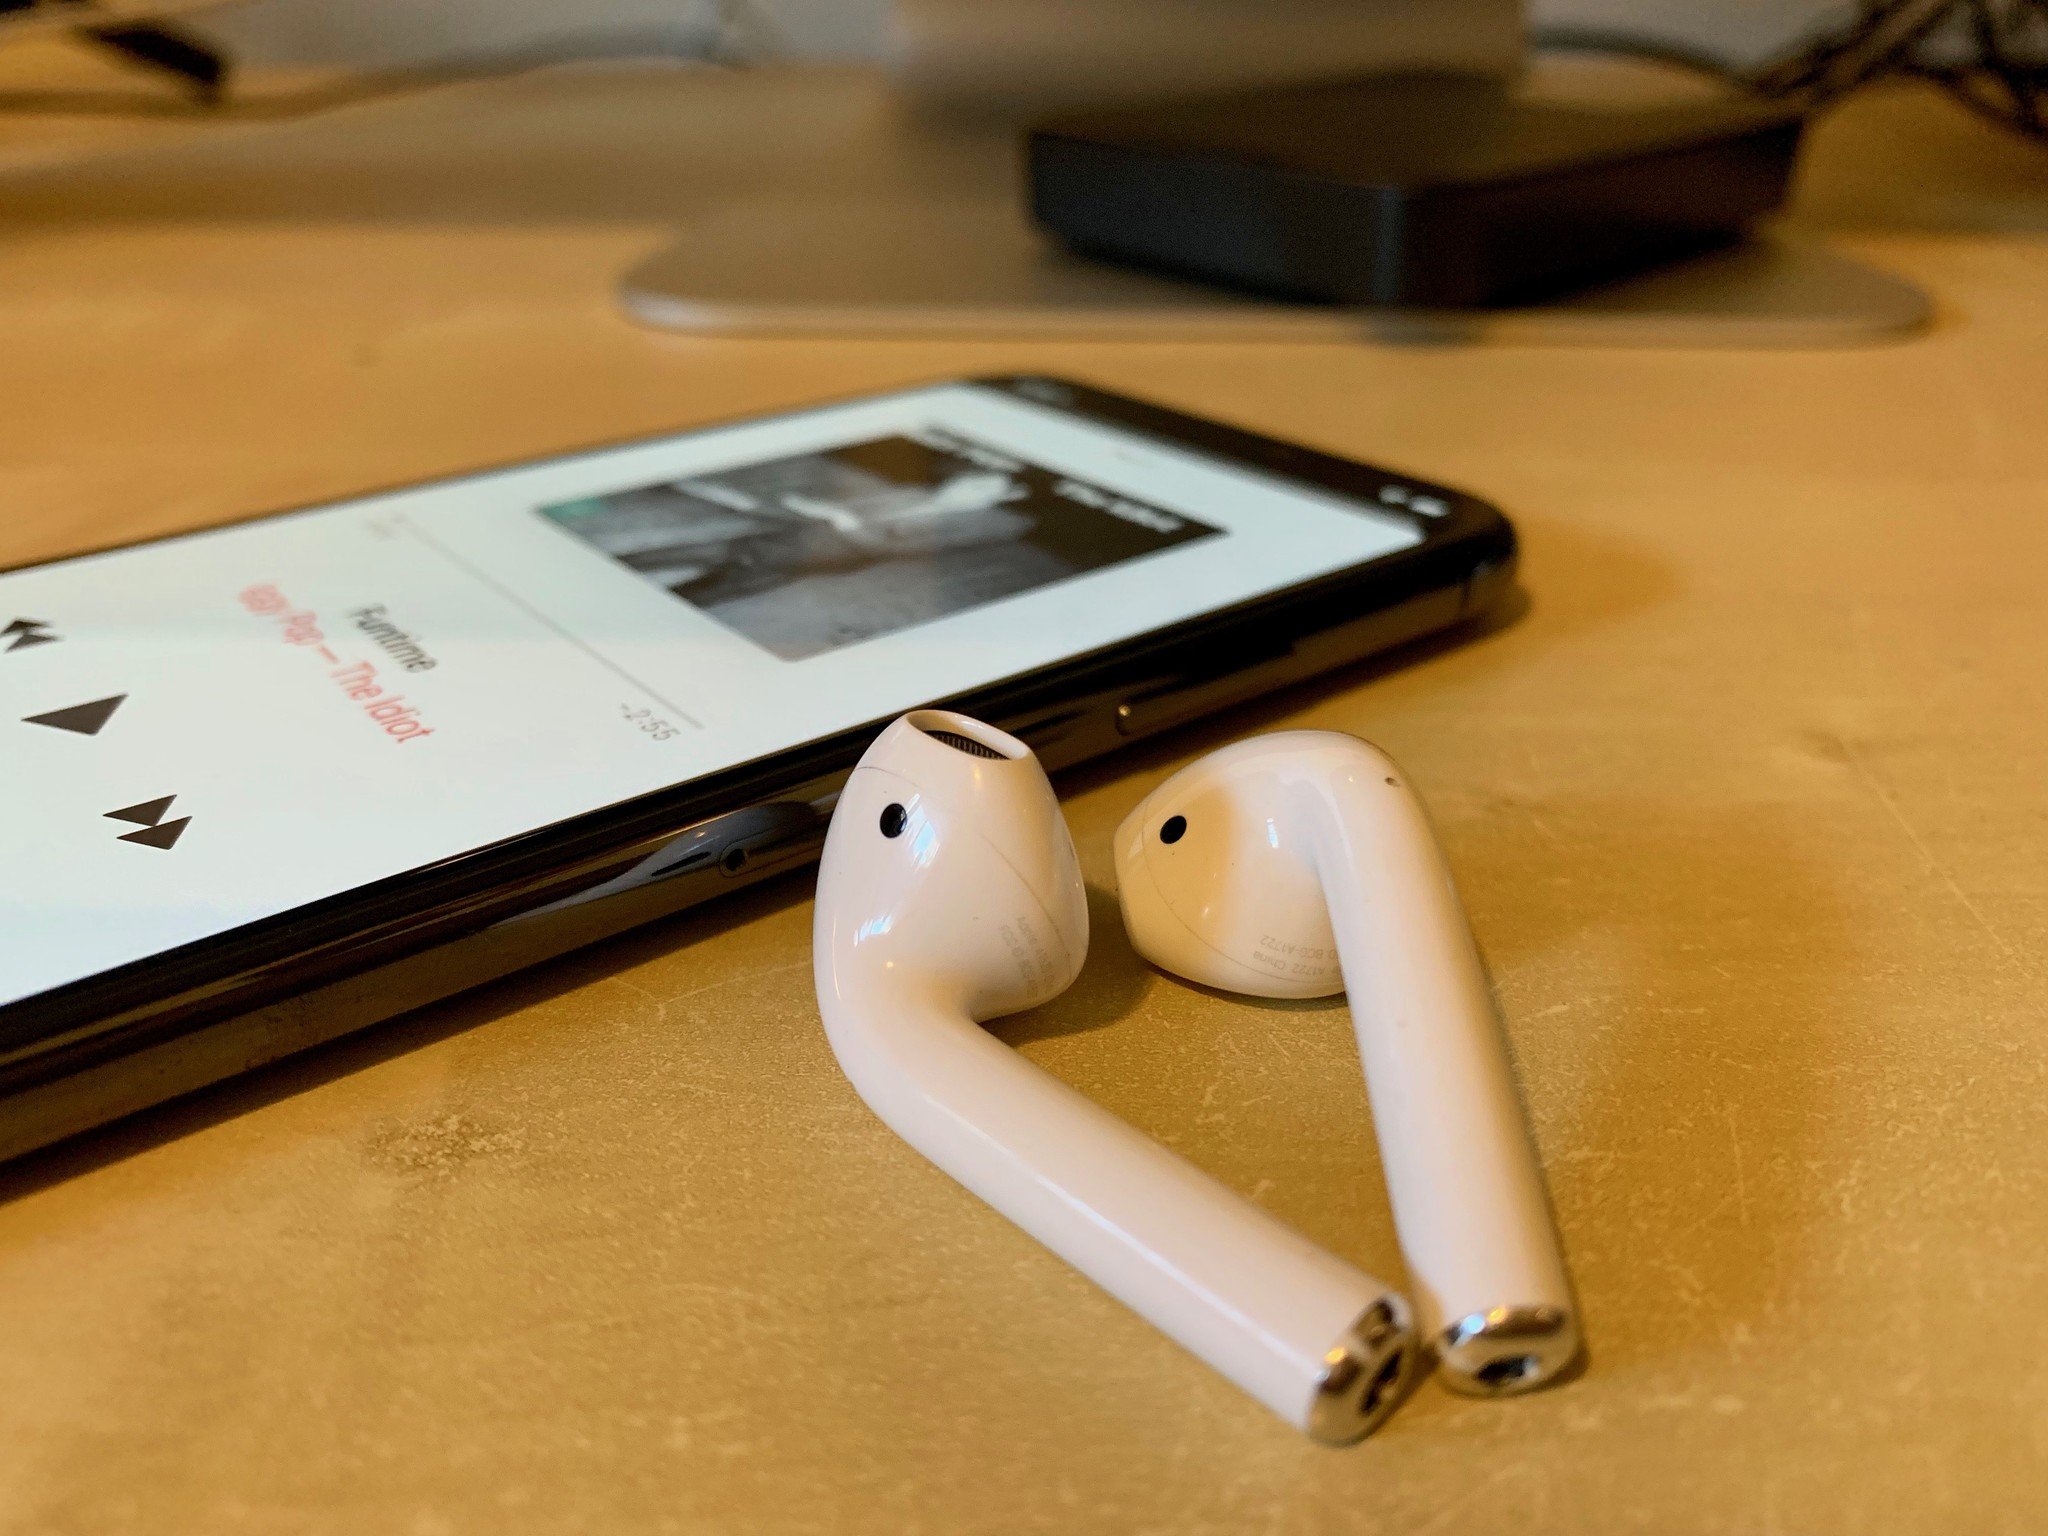 AirPods on the fritz